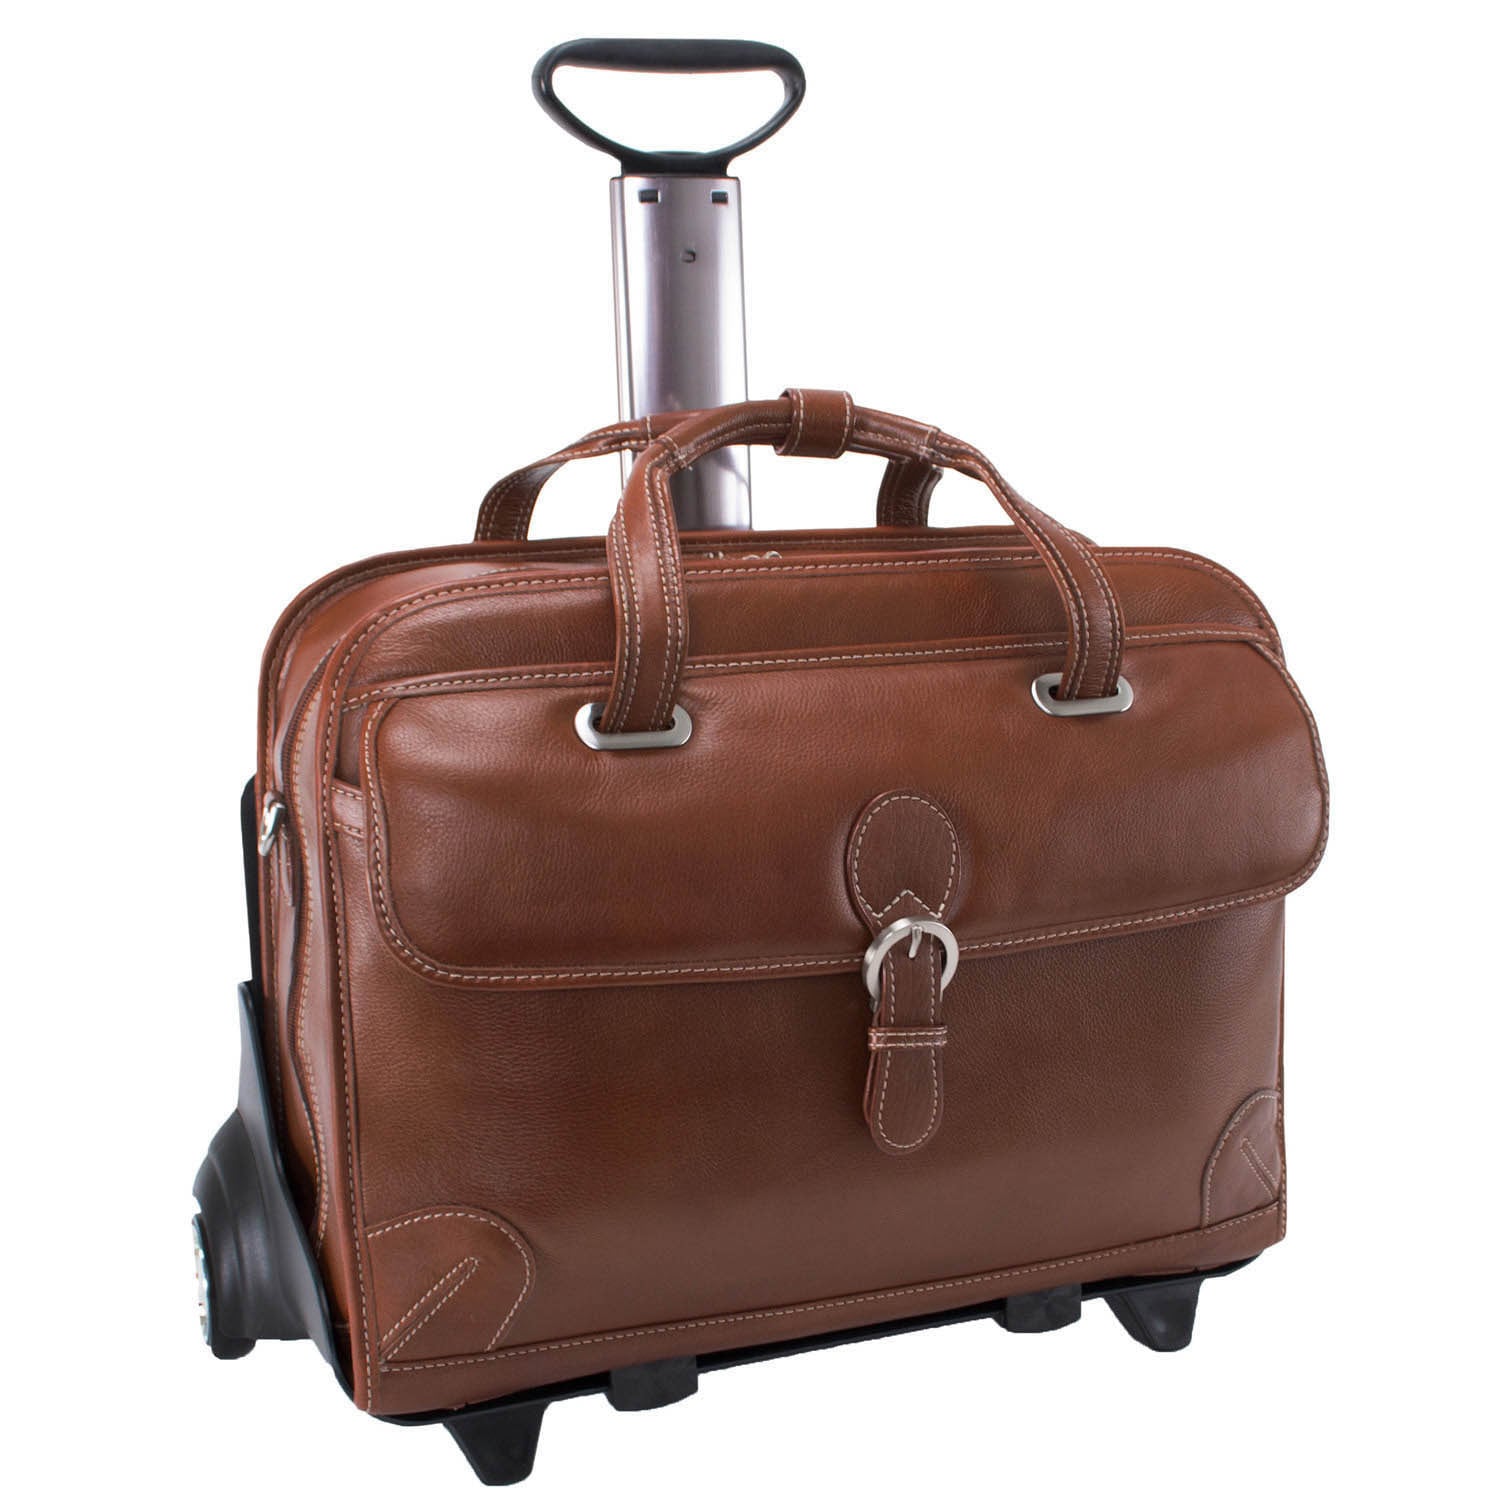 Siamod Carugetto Leather Detachable Wheeled Laptop Case